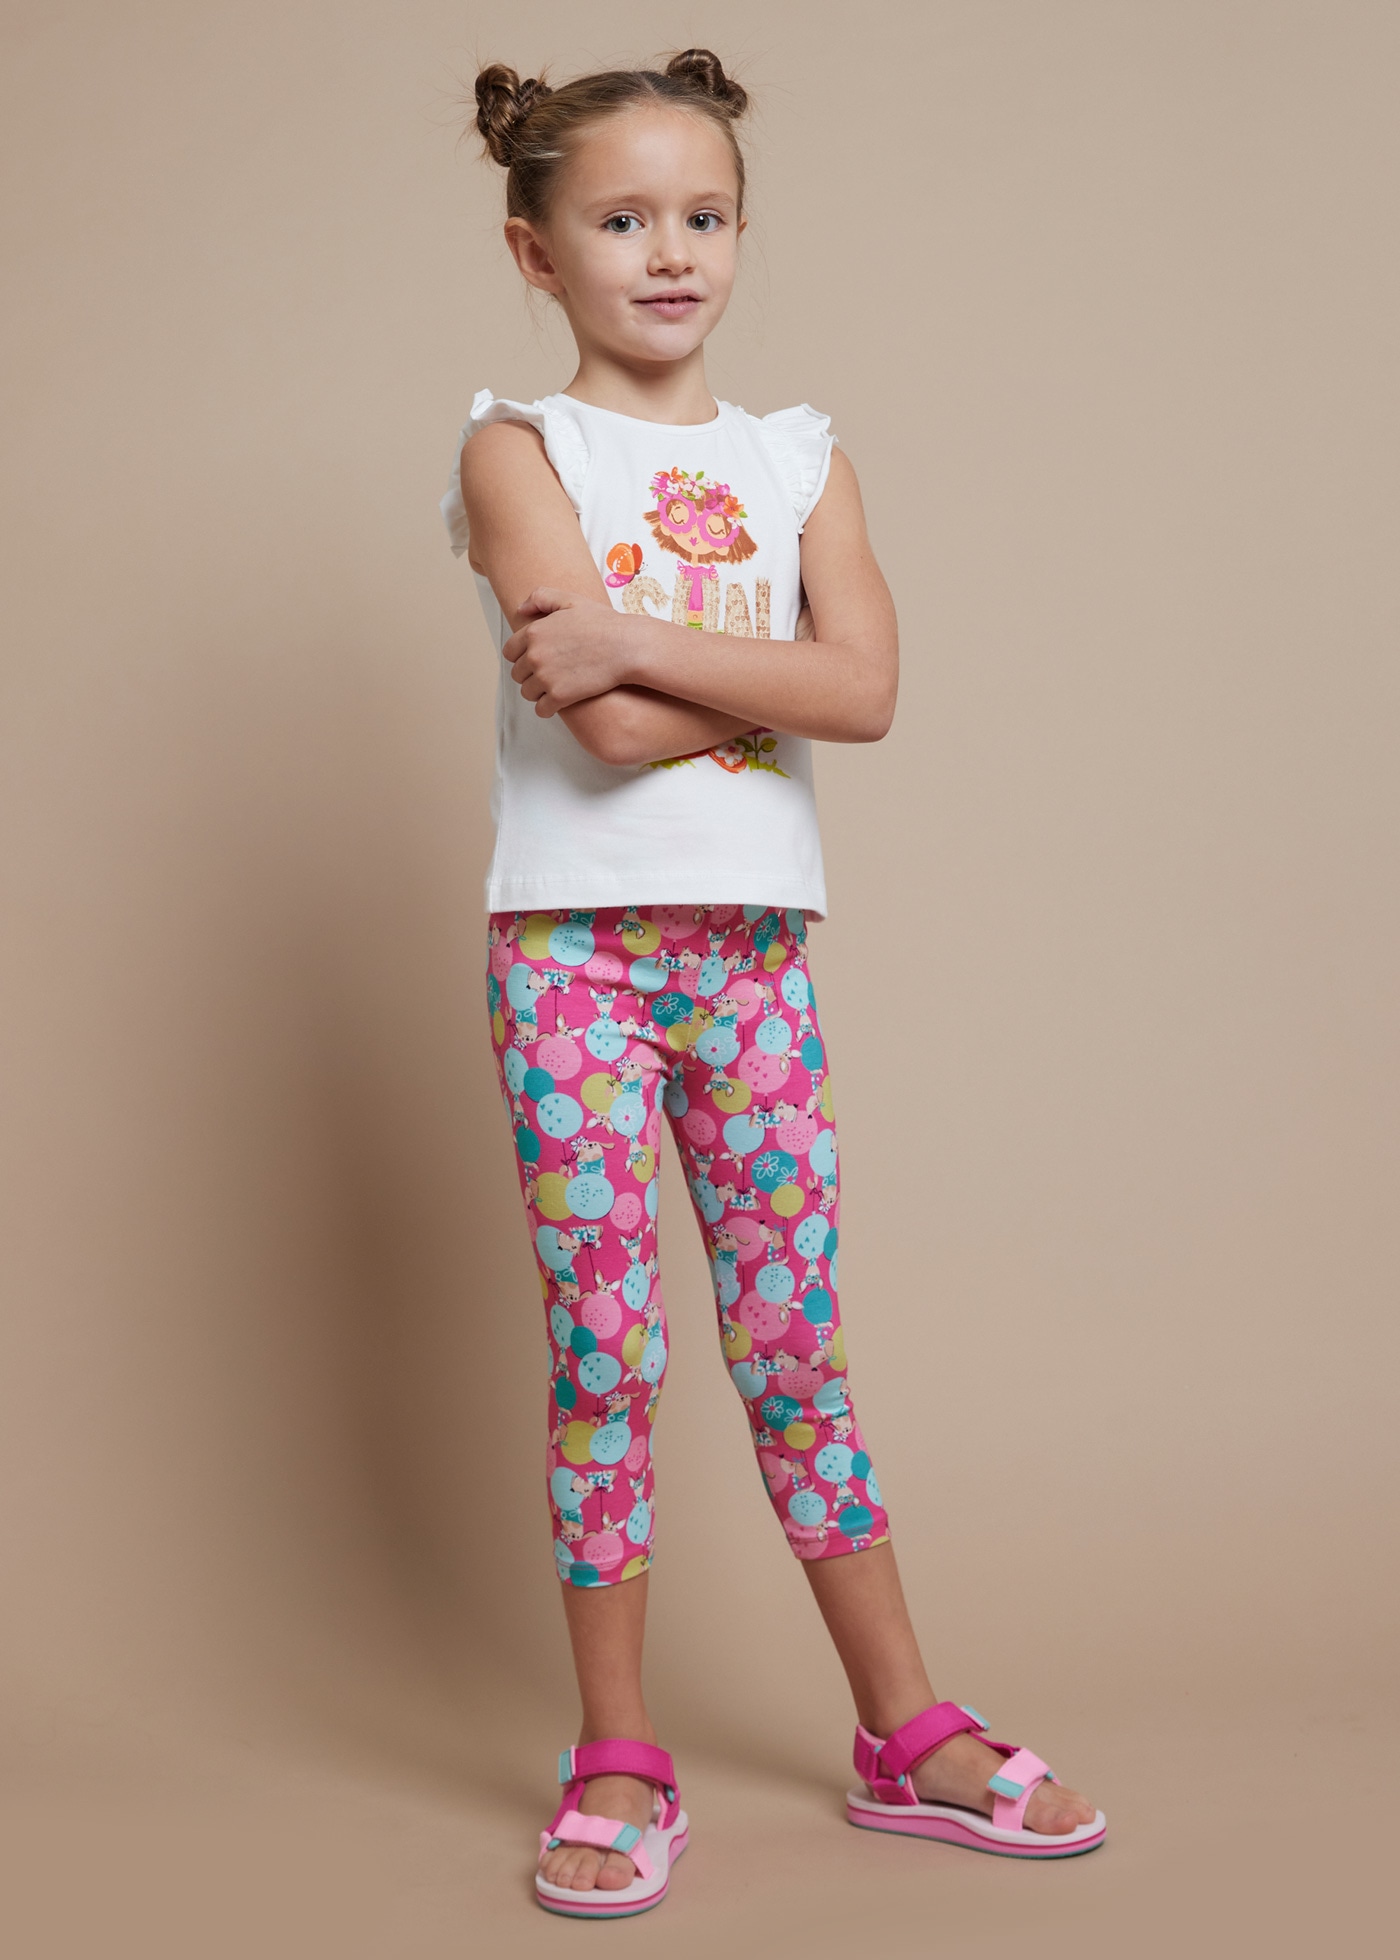 Hosiery 10 colors Girls Printed Capri, 145, Size: s m l xl at Rs